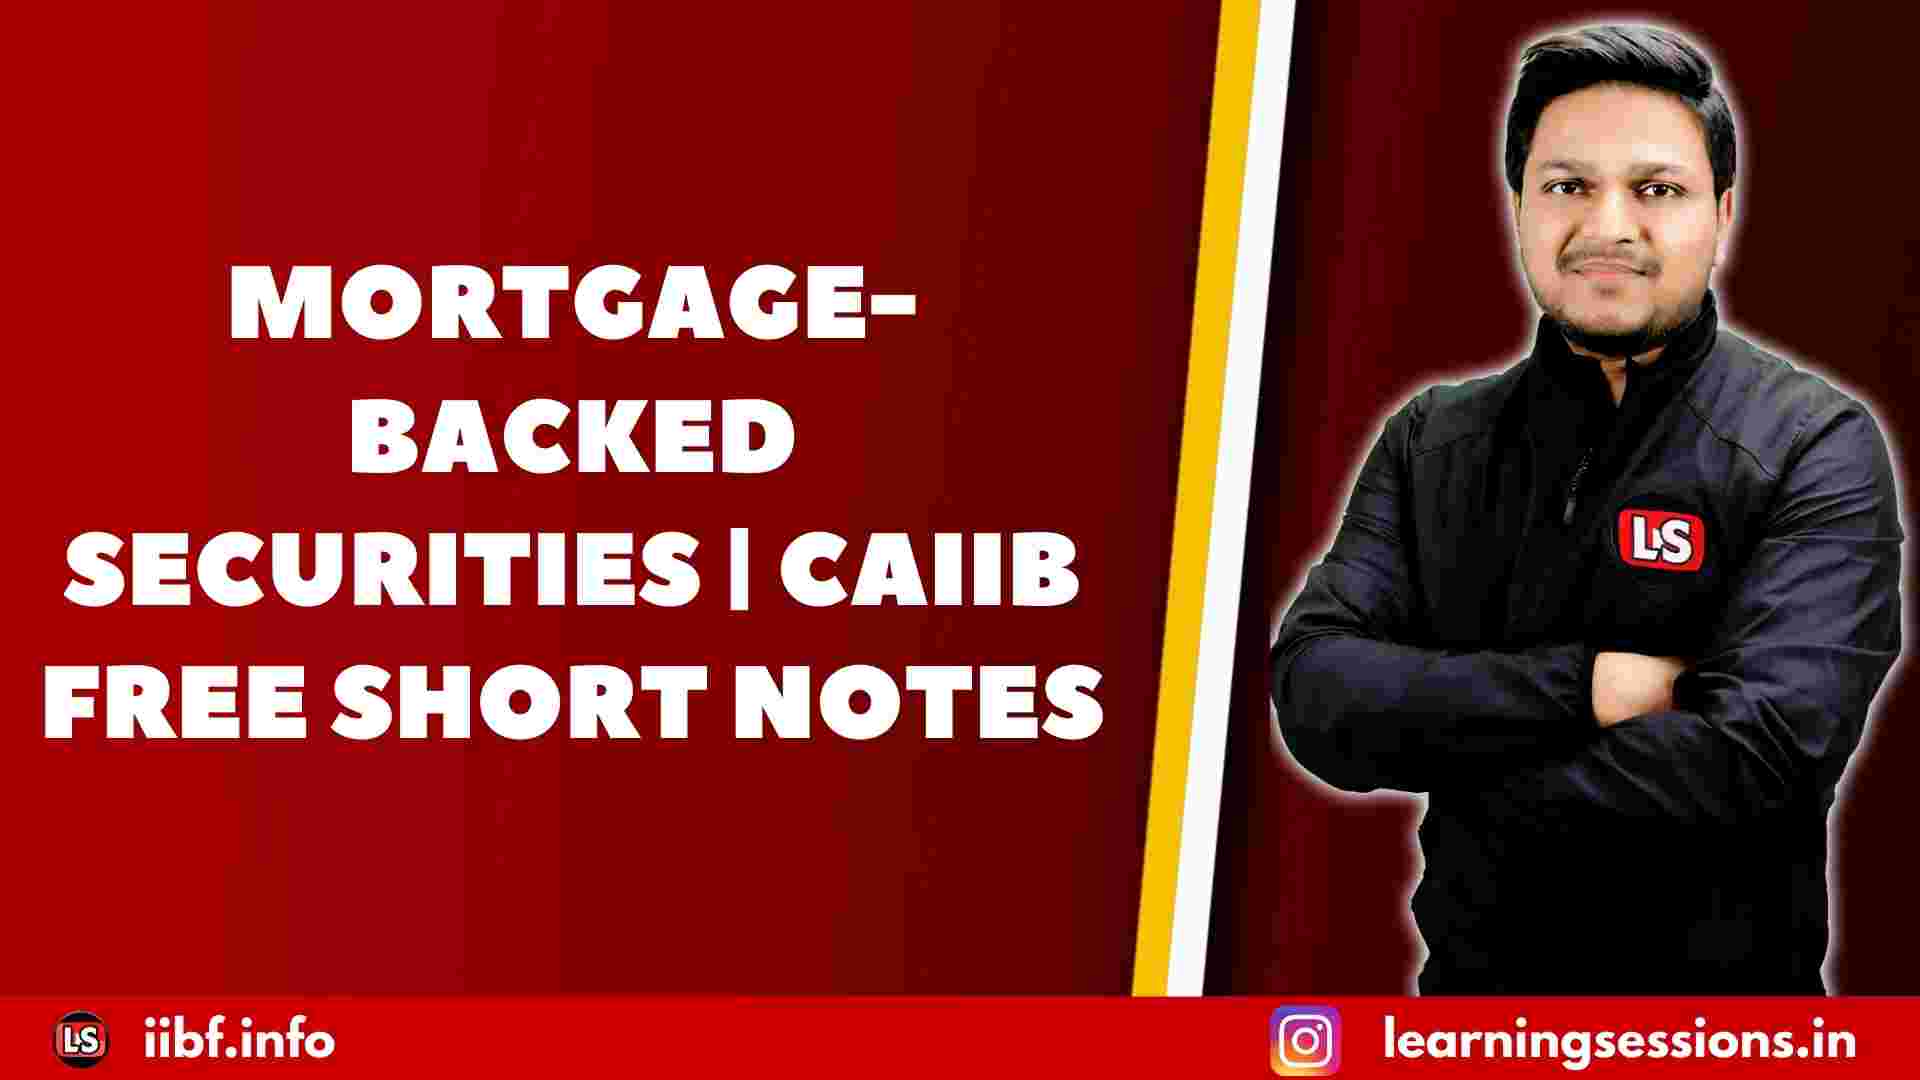 MORTGAGE-BACKED SECURITIES | CAIIB FREE SHORT NOTES